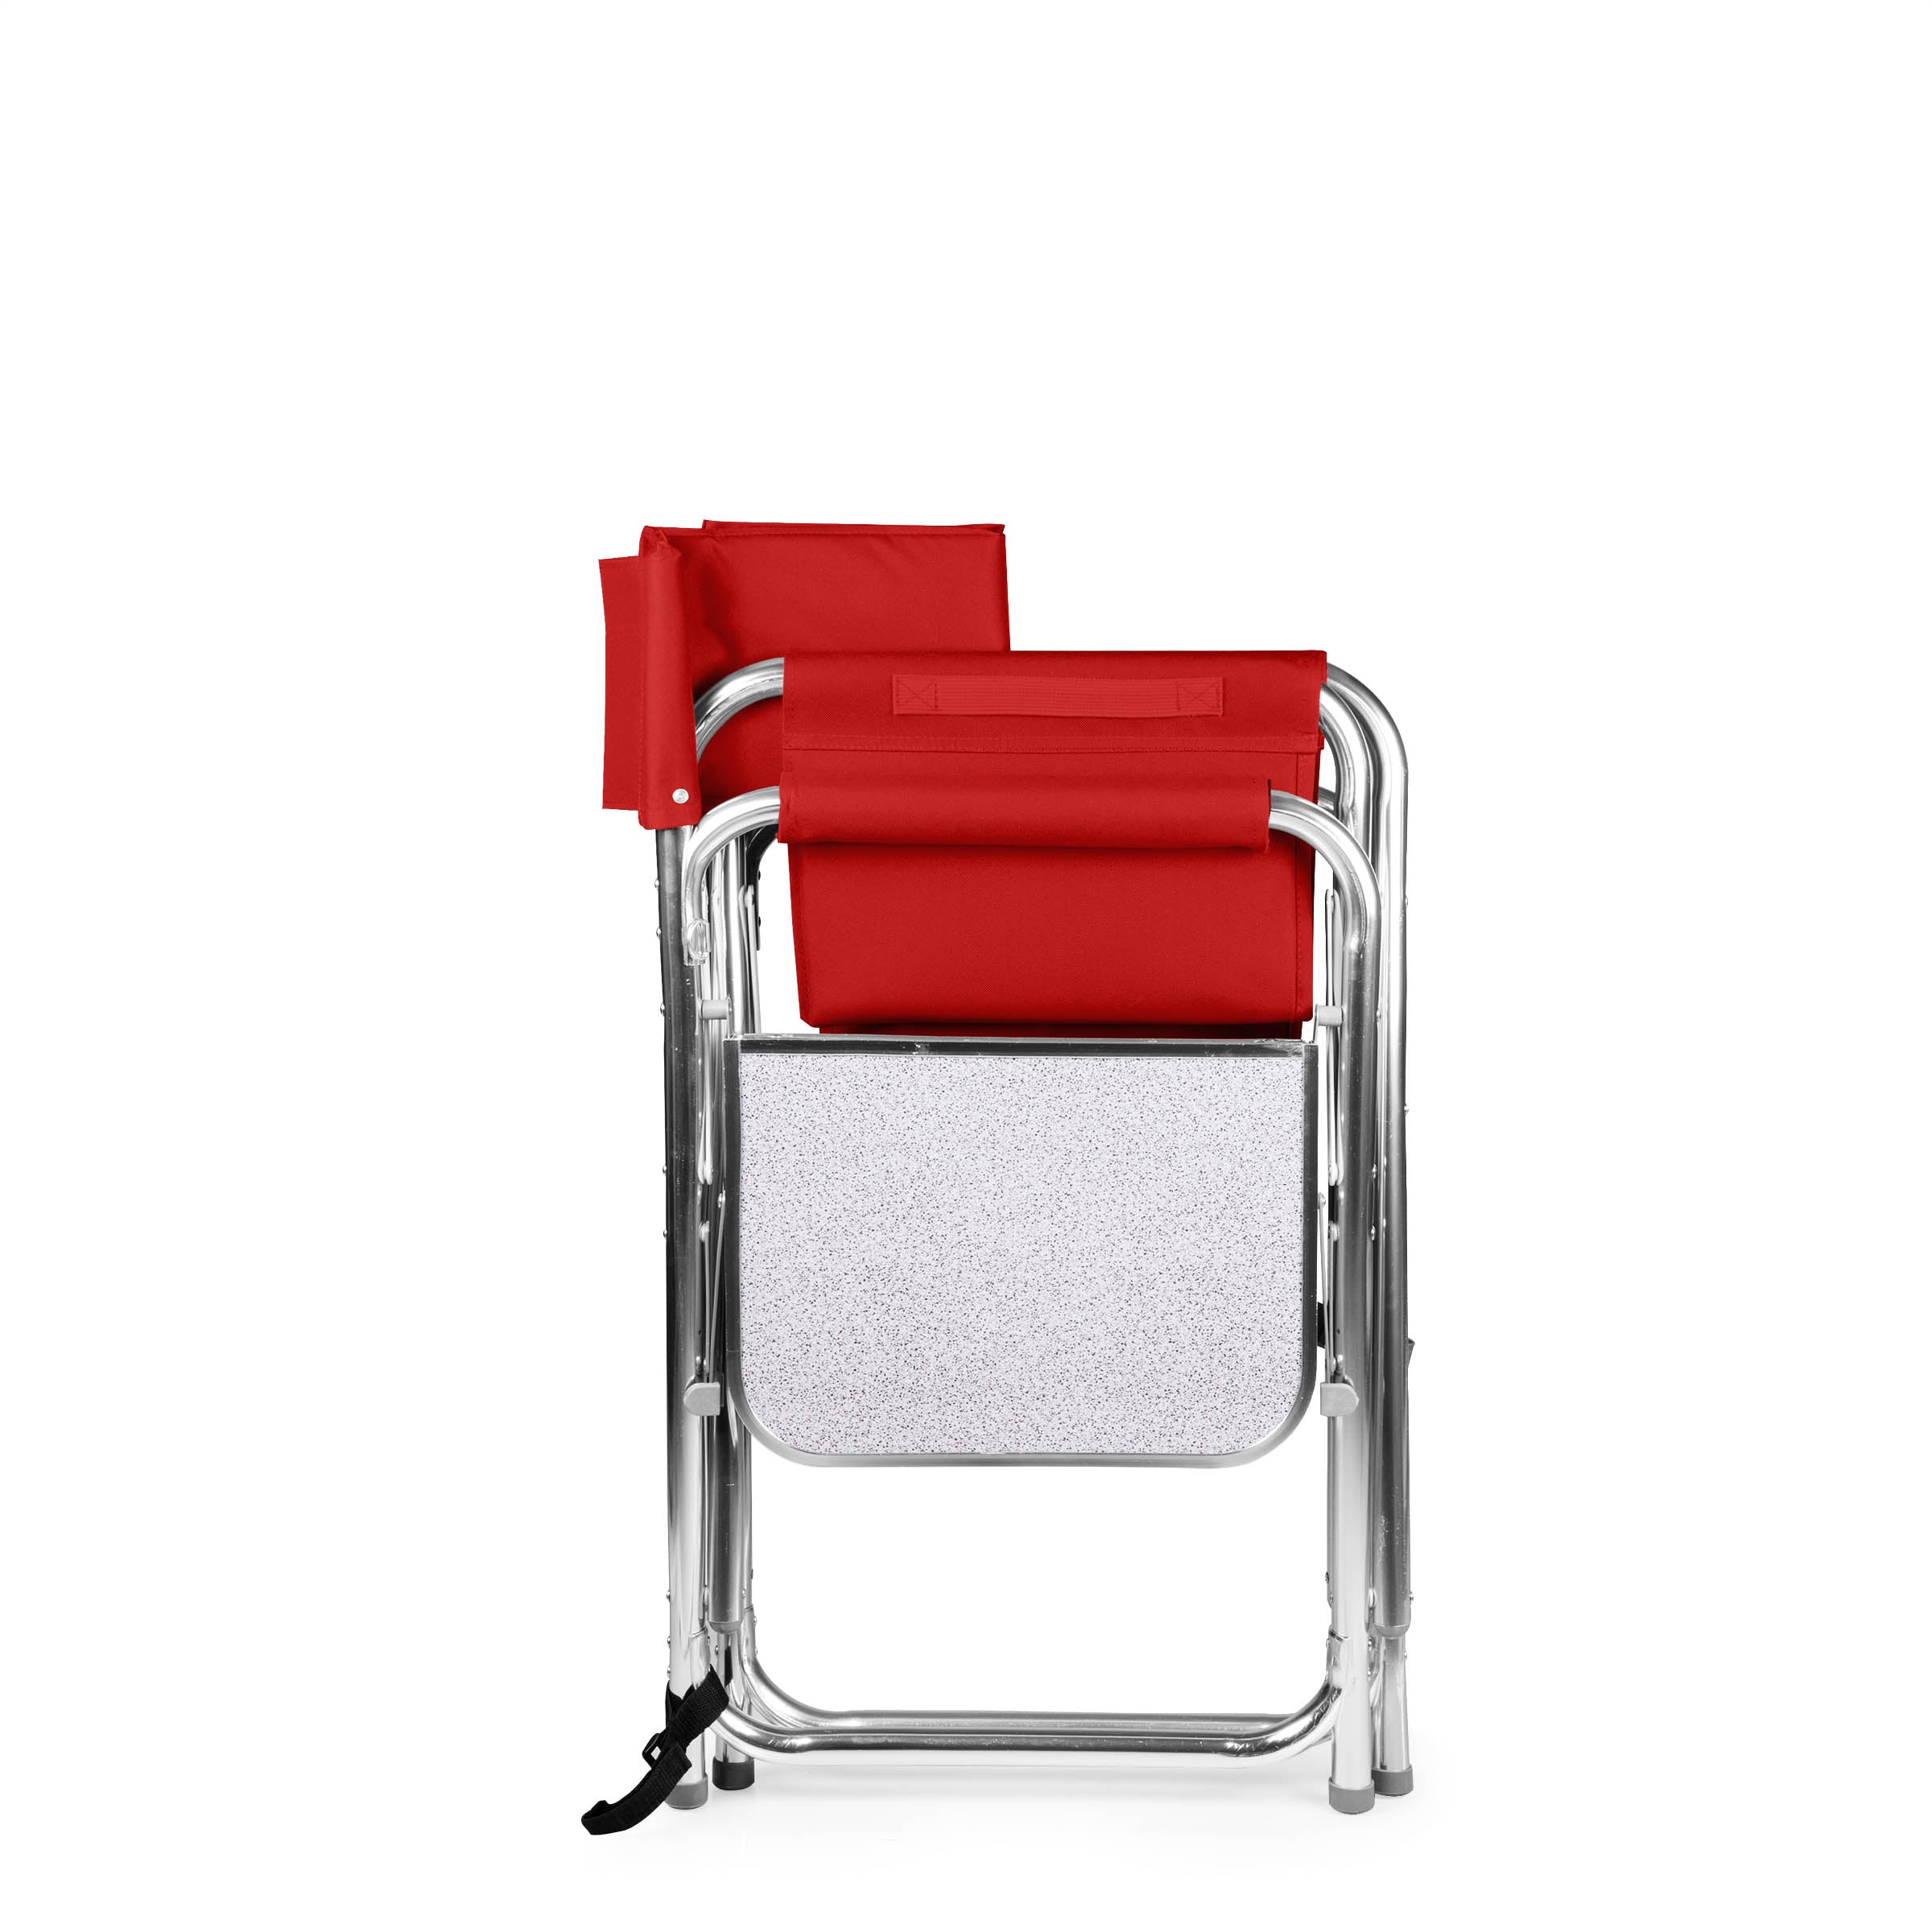 Detroit Red Wings - Sports Chair